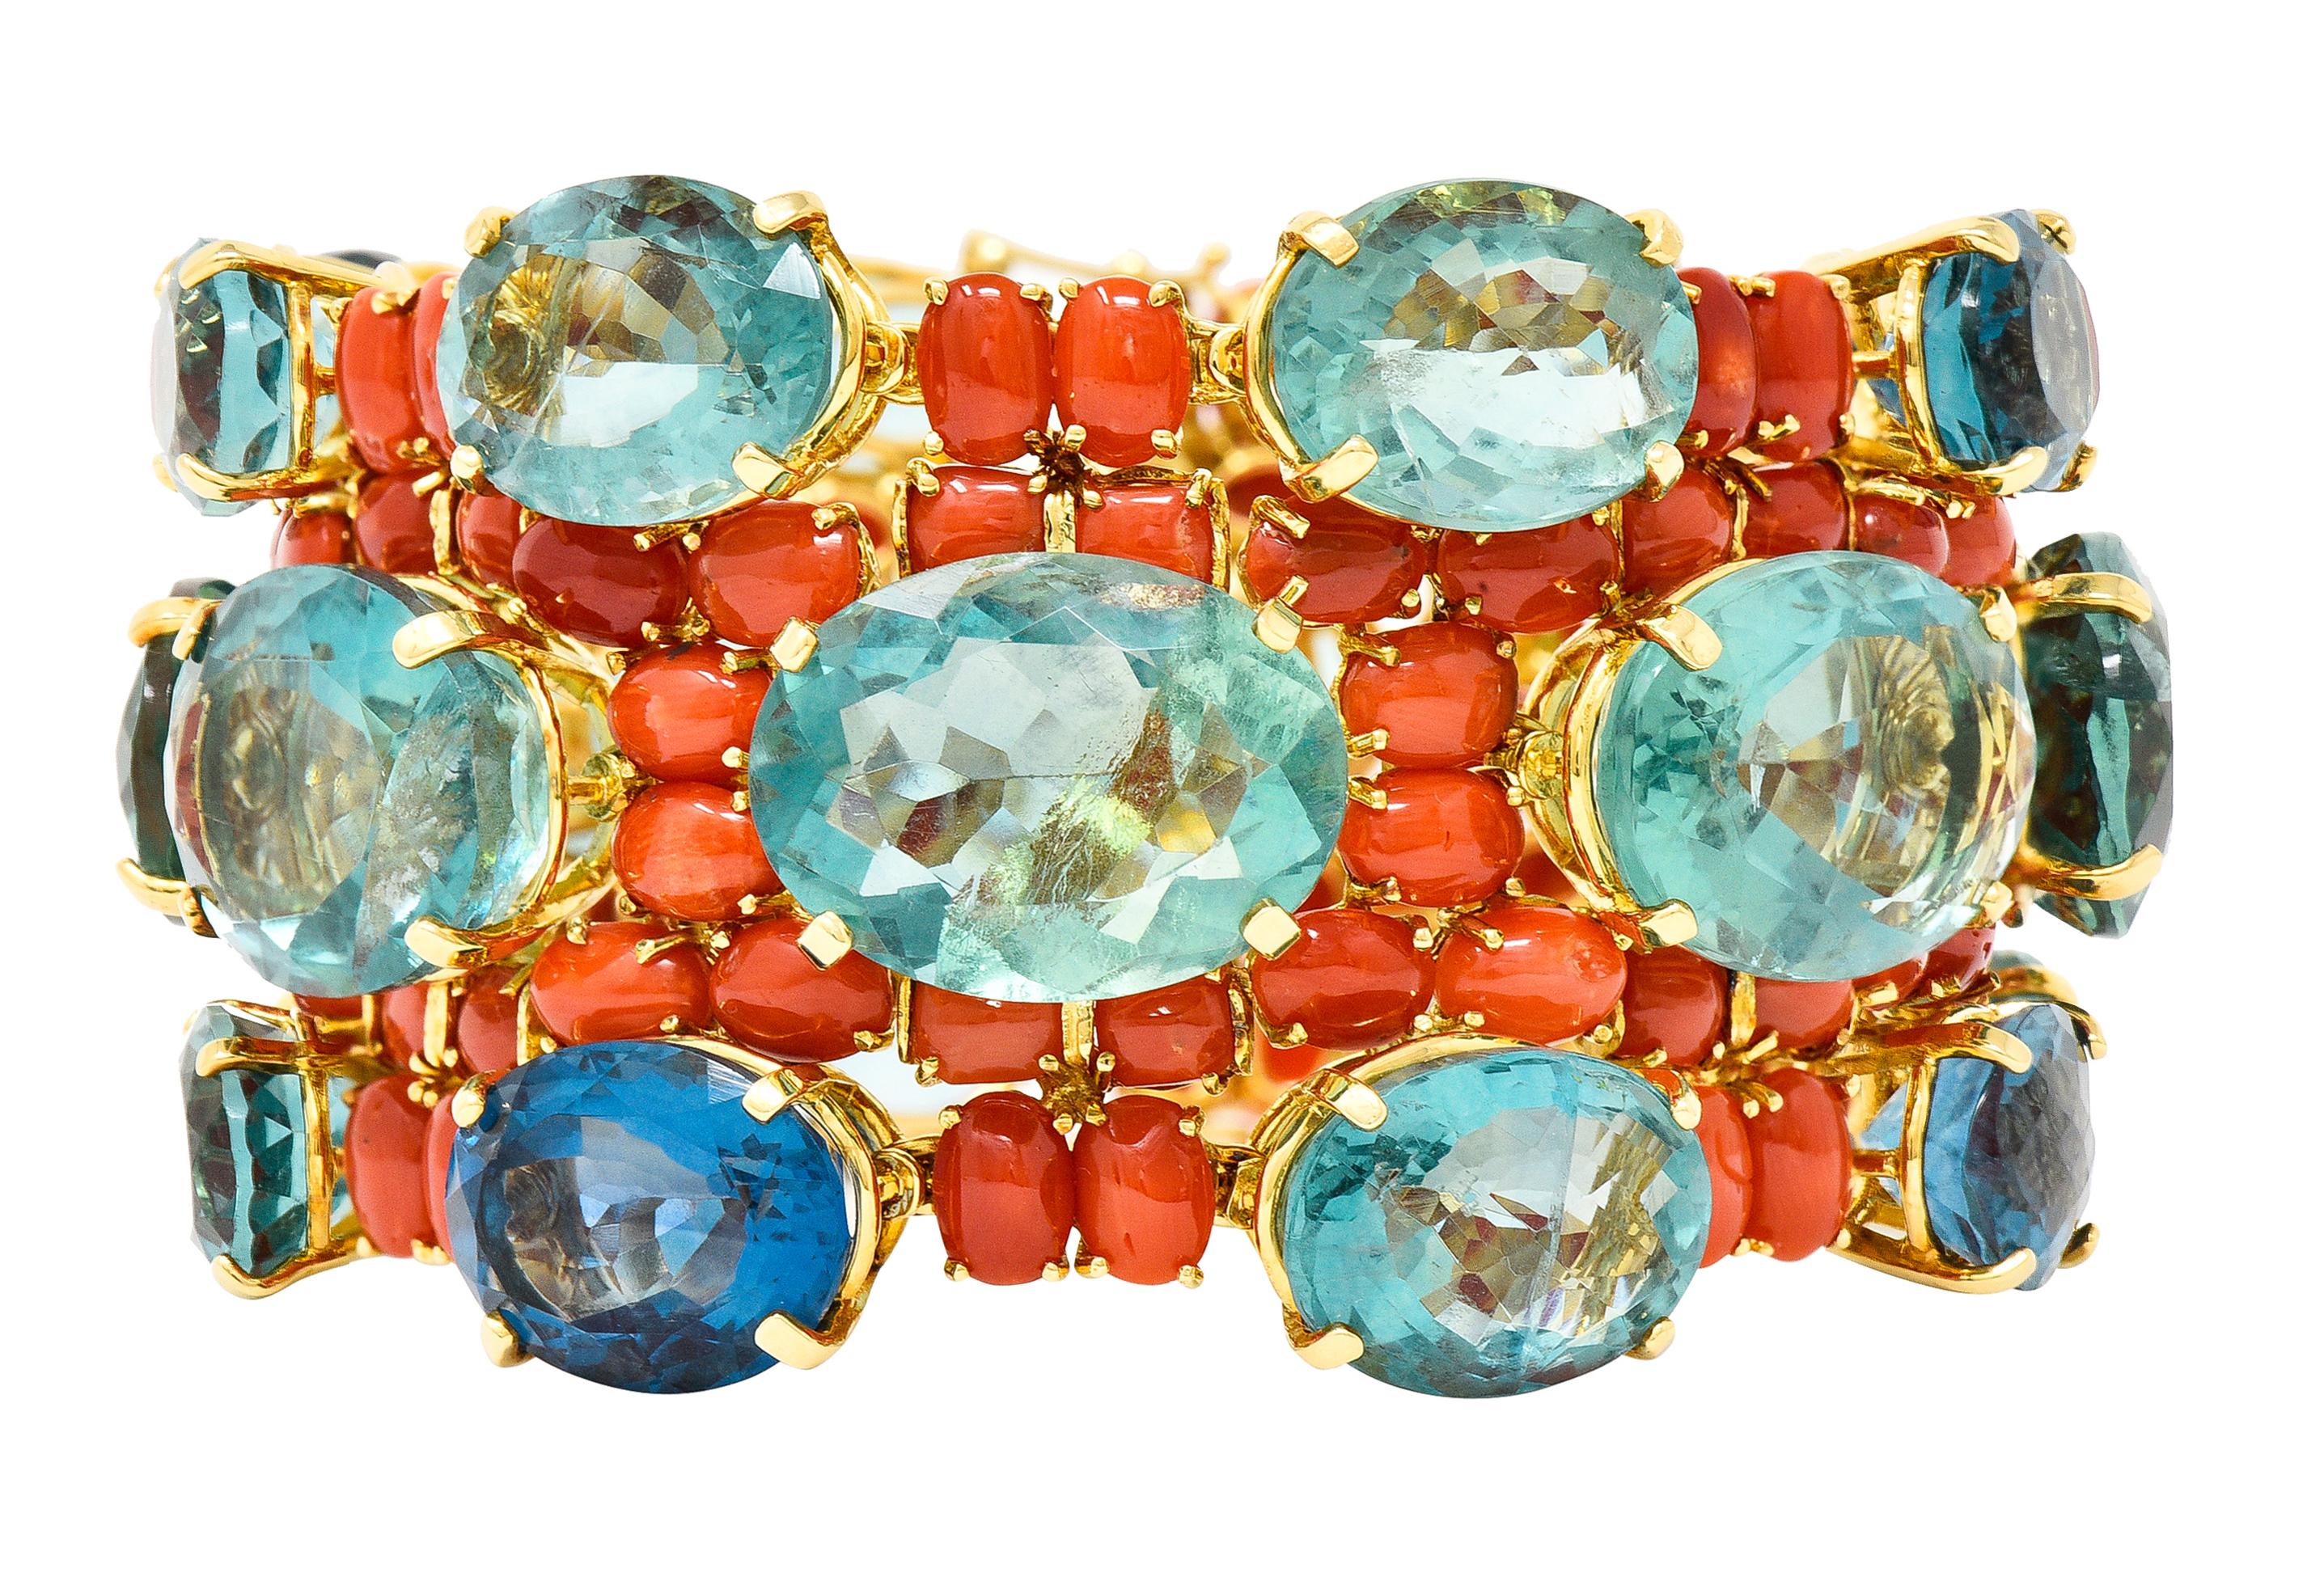 Bracelet is comprised of oval cut fluorite and coral cabochons prong set in meshed gold baskets. Fluorite is transparent bluish-green in color with medium to light saturation and natural inclusions. Ranging in size from 1.0 x 12.0 mm to 15.0 x 20.0